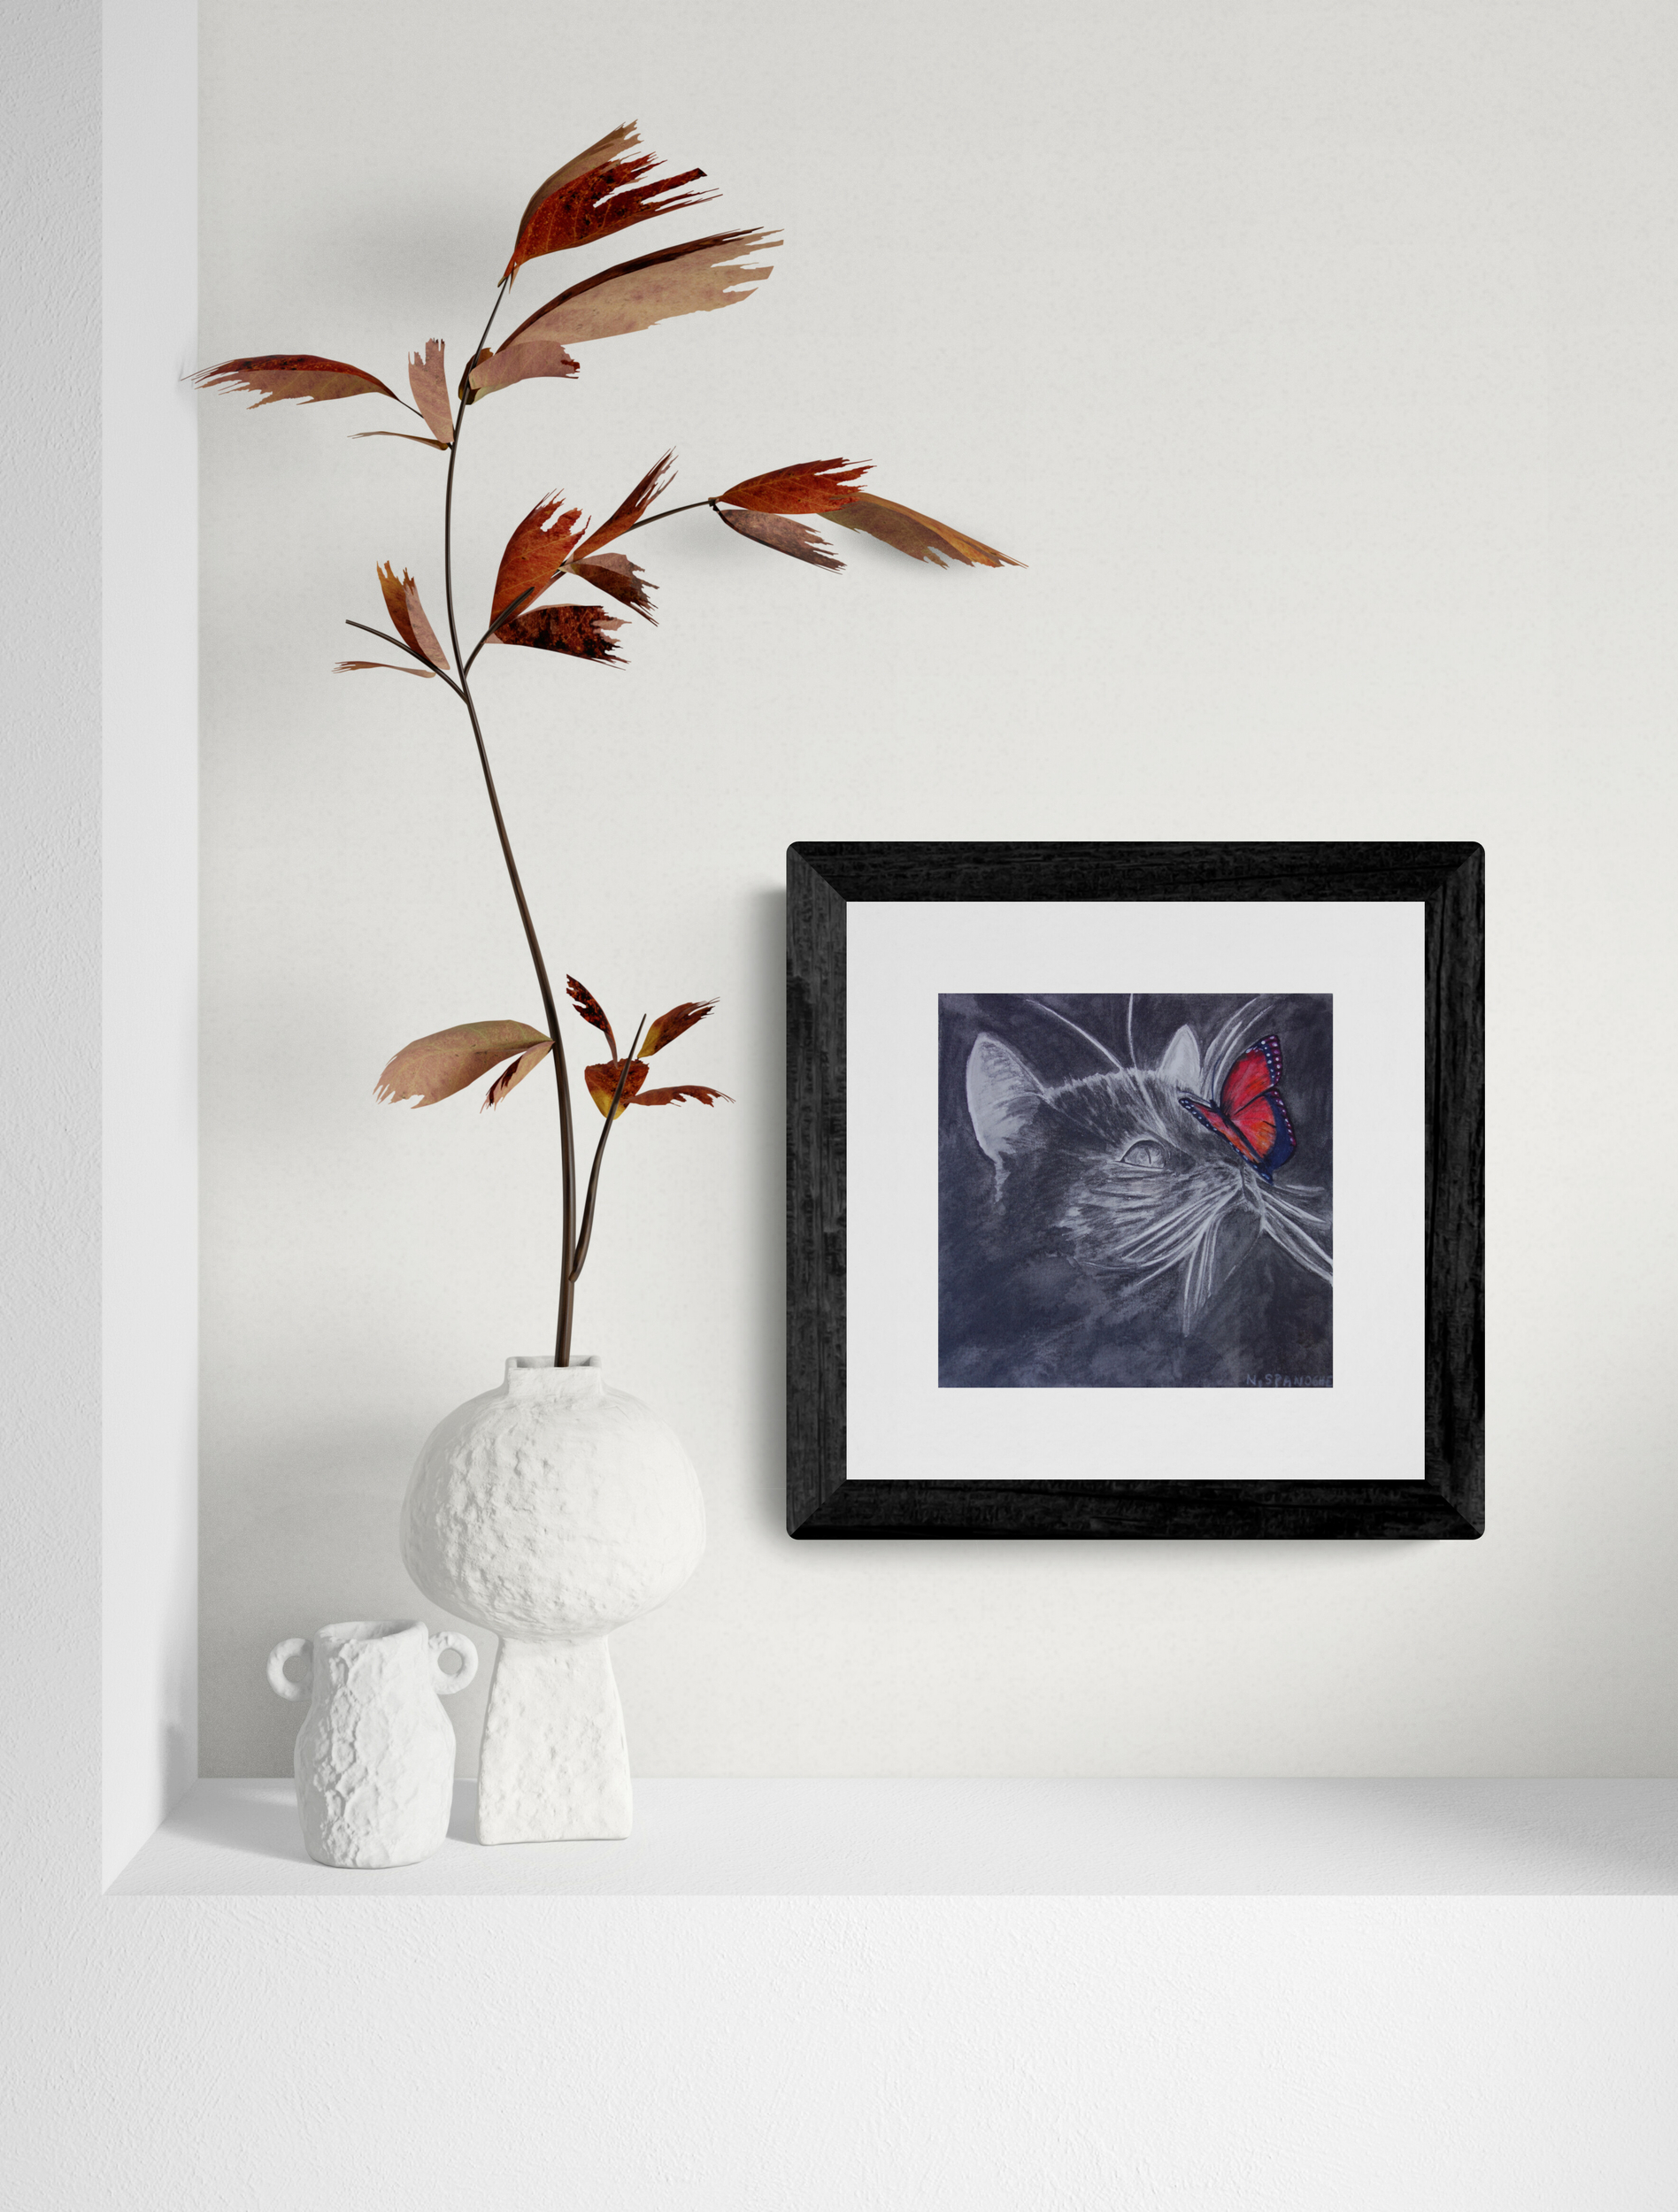 Leafy_plant_sitting_in_wall_alcove (11)